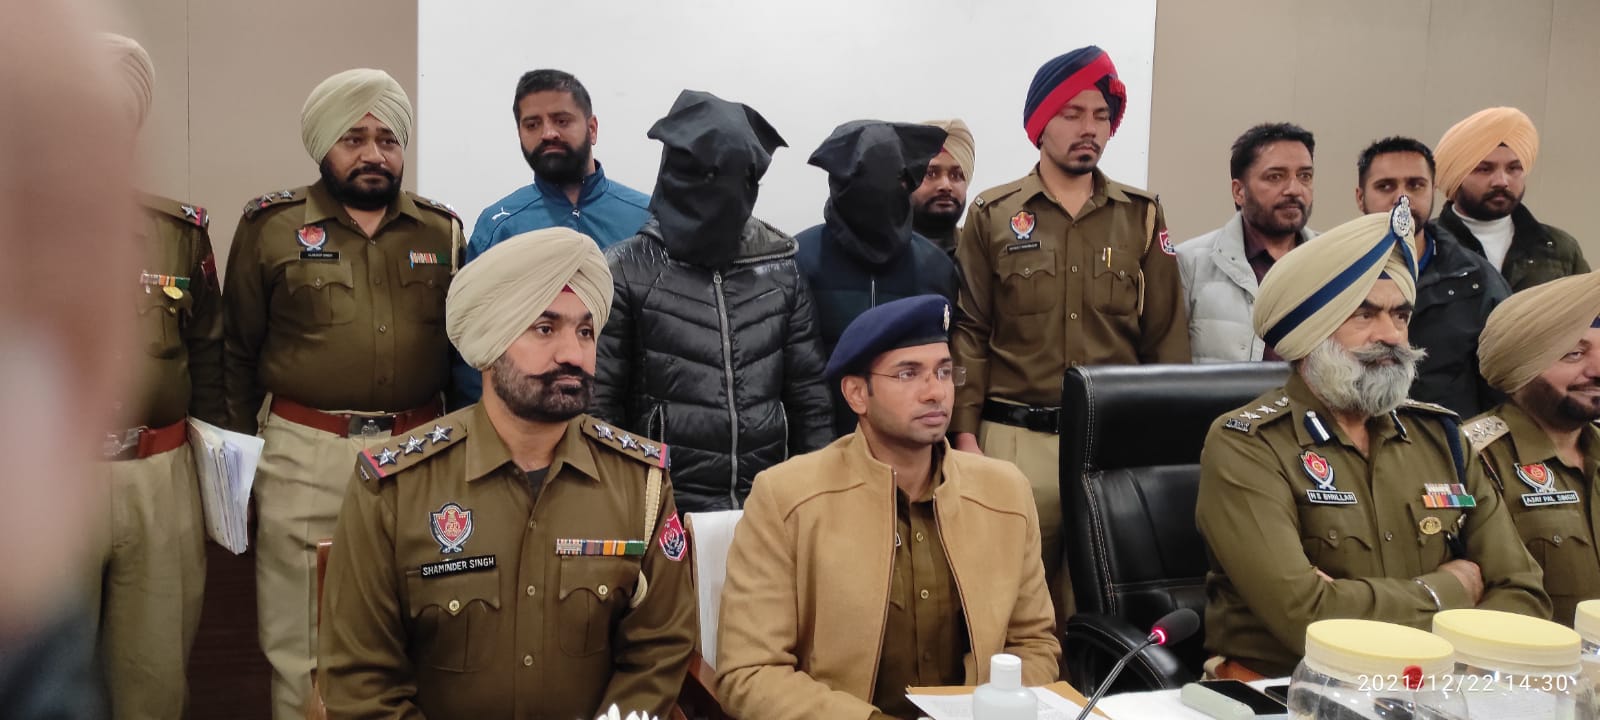 Patiala Police solved mysterious loot of 8.5 lacs from car